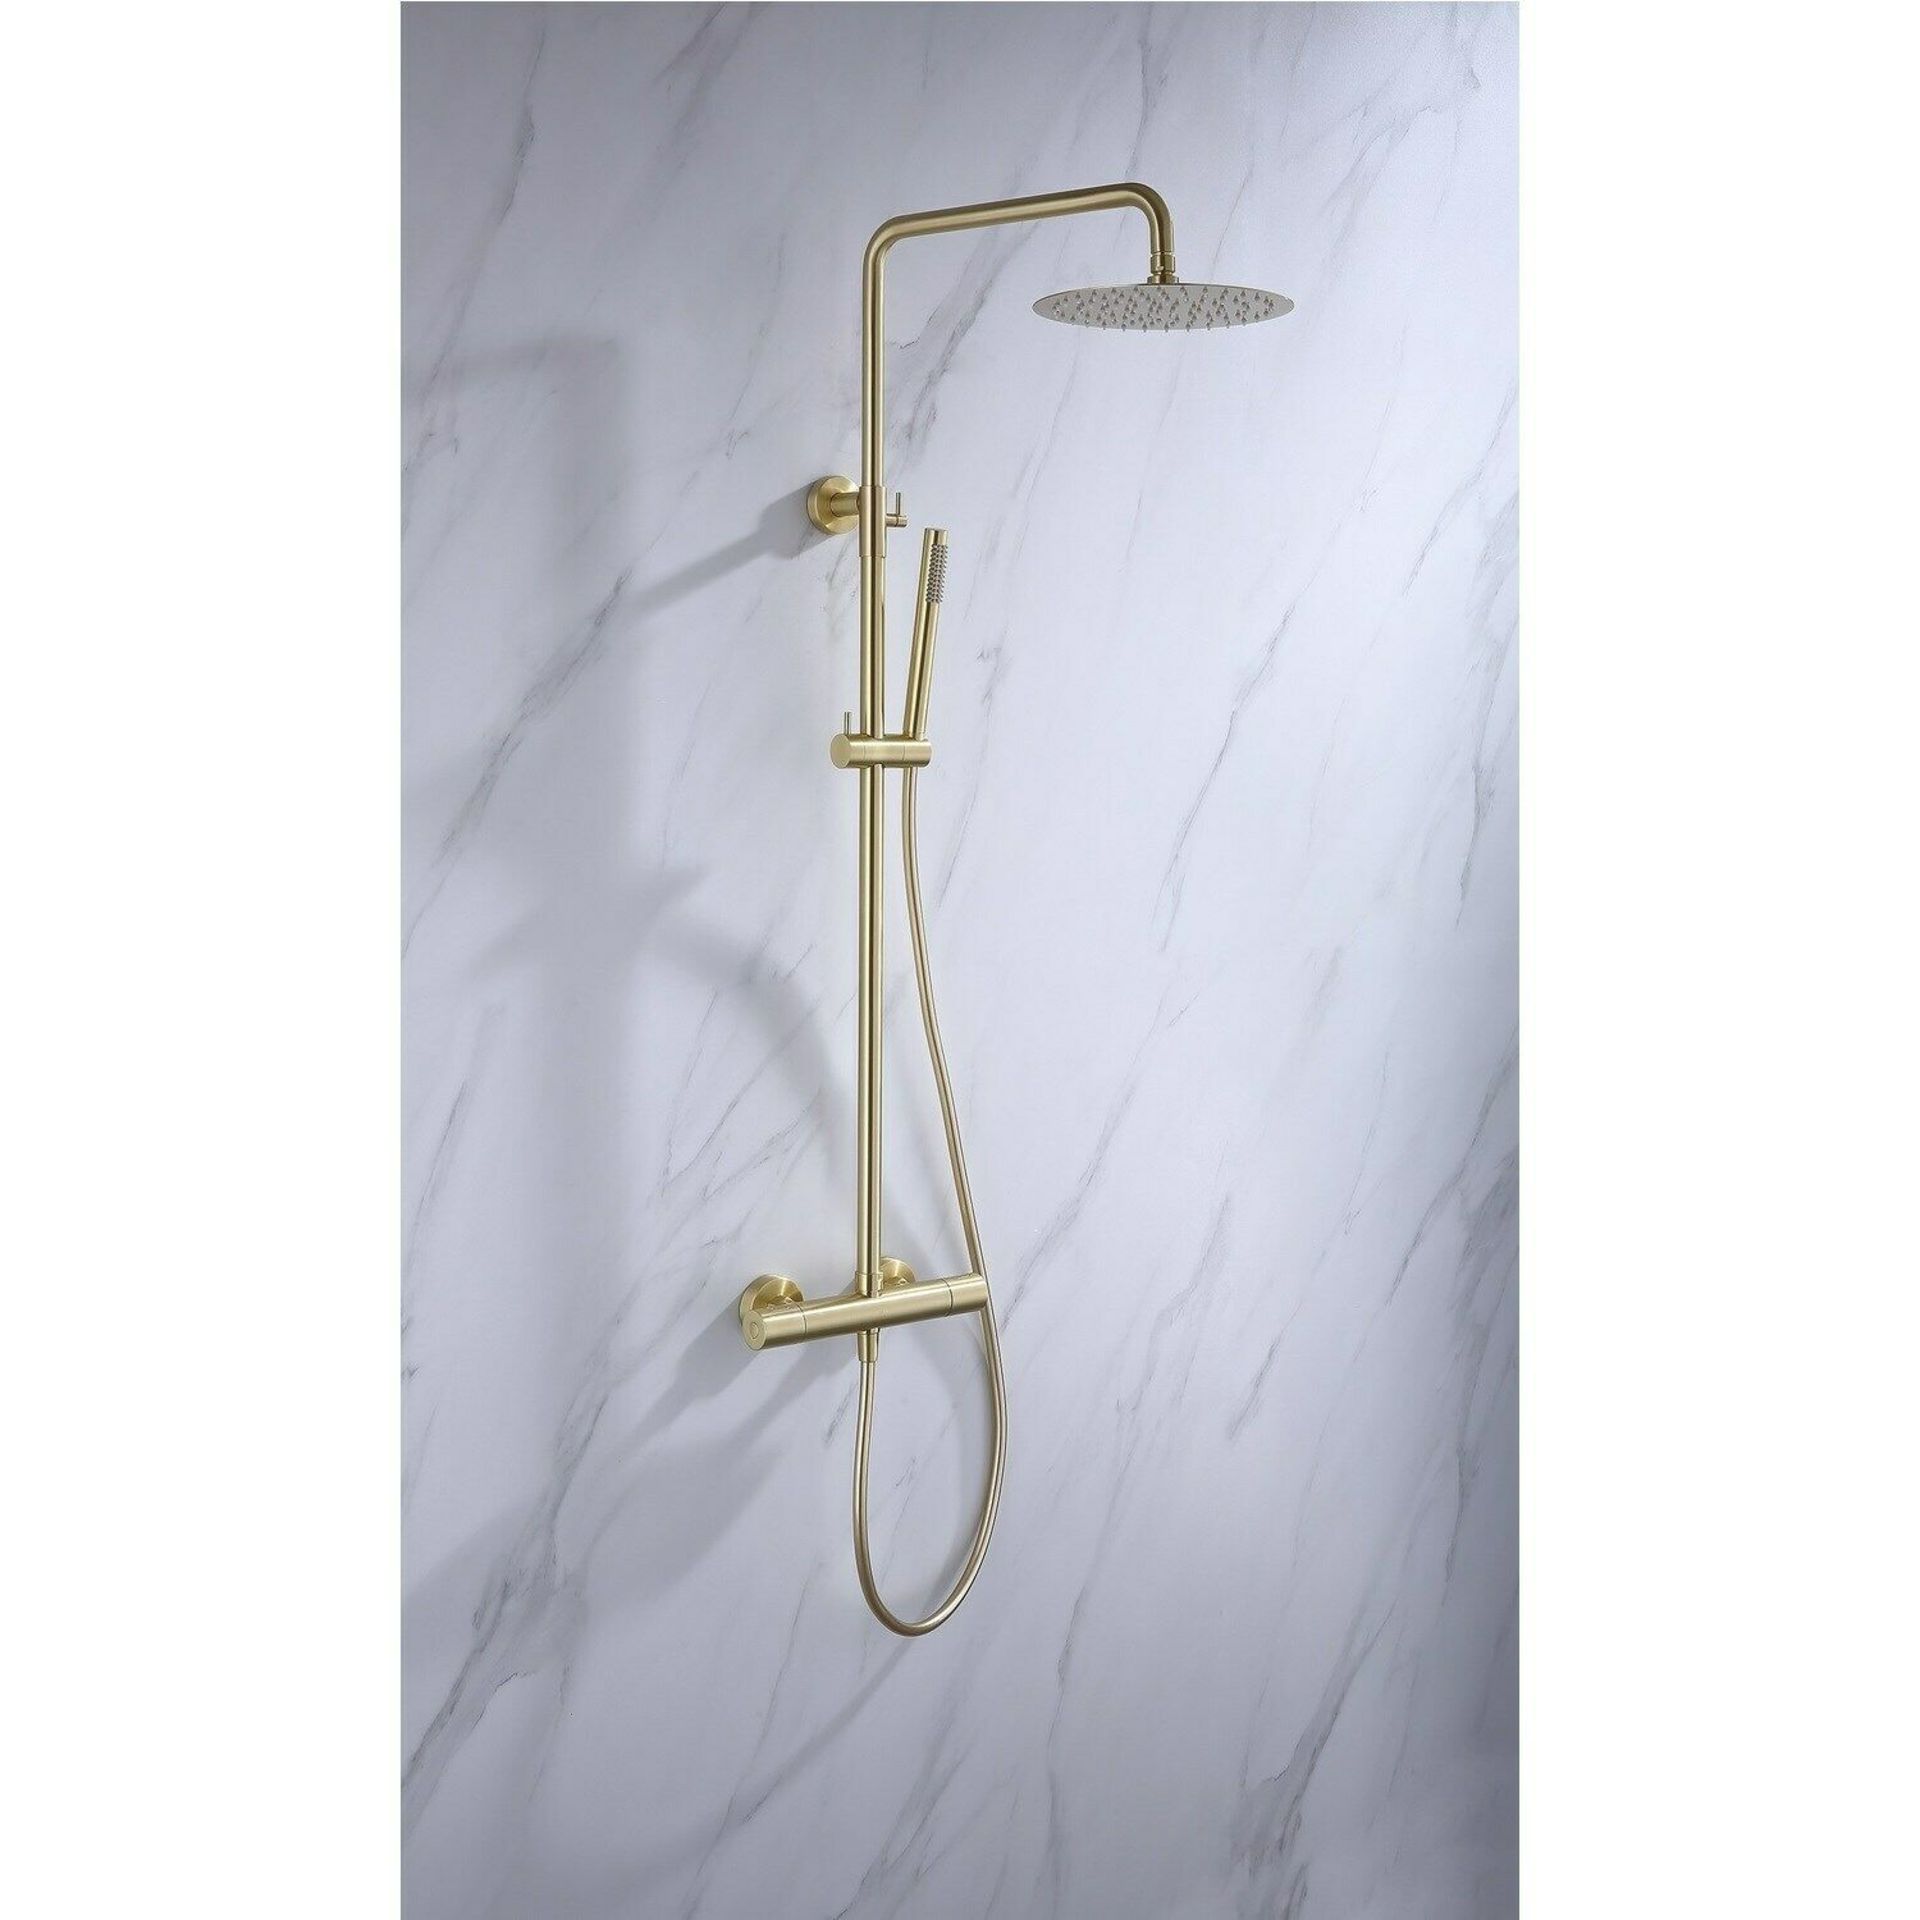 New (D22) Arissa Brushed Brass Shower Set. RRP £384.99. Distinctive Brushed Brass Finish. The... - Image 2 of 3